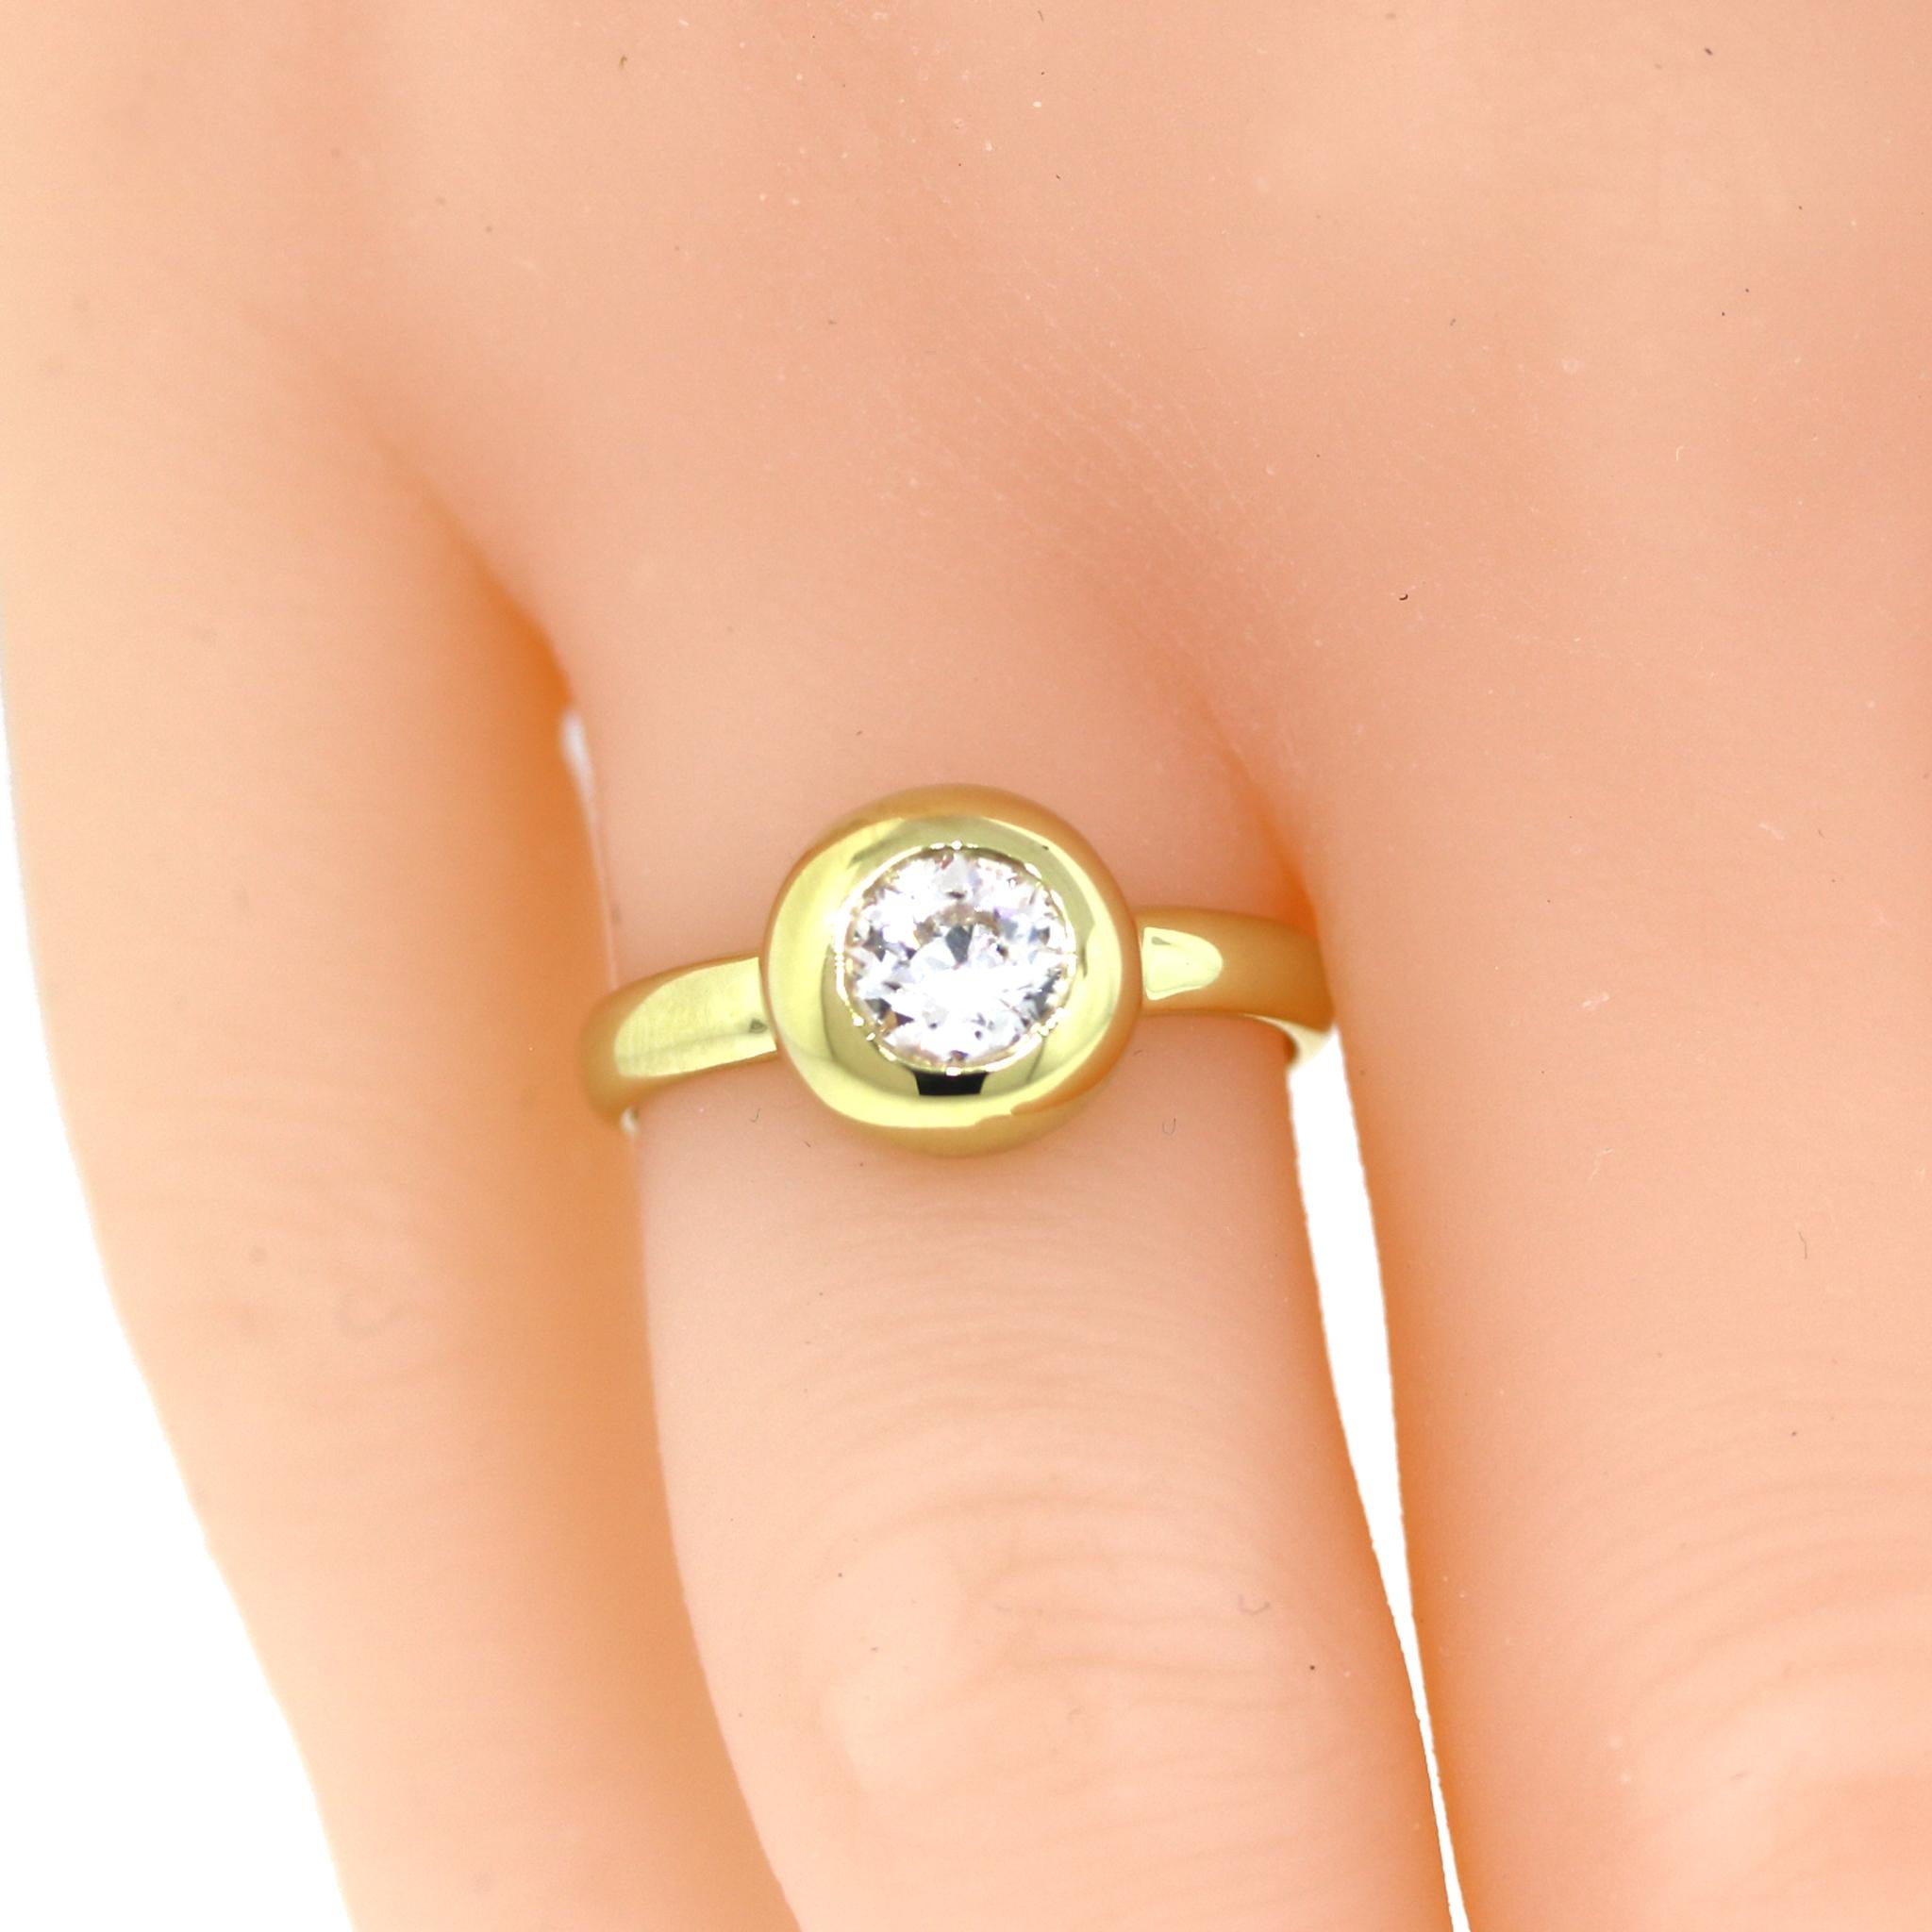 18 kt Yellow Gold
Diamond: 0.68 ct twd
Color: I-J
Clarity: SI2
Ring Size: 6
Total Weight: 4 grams